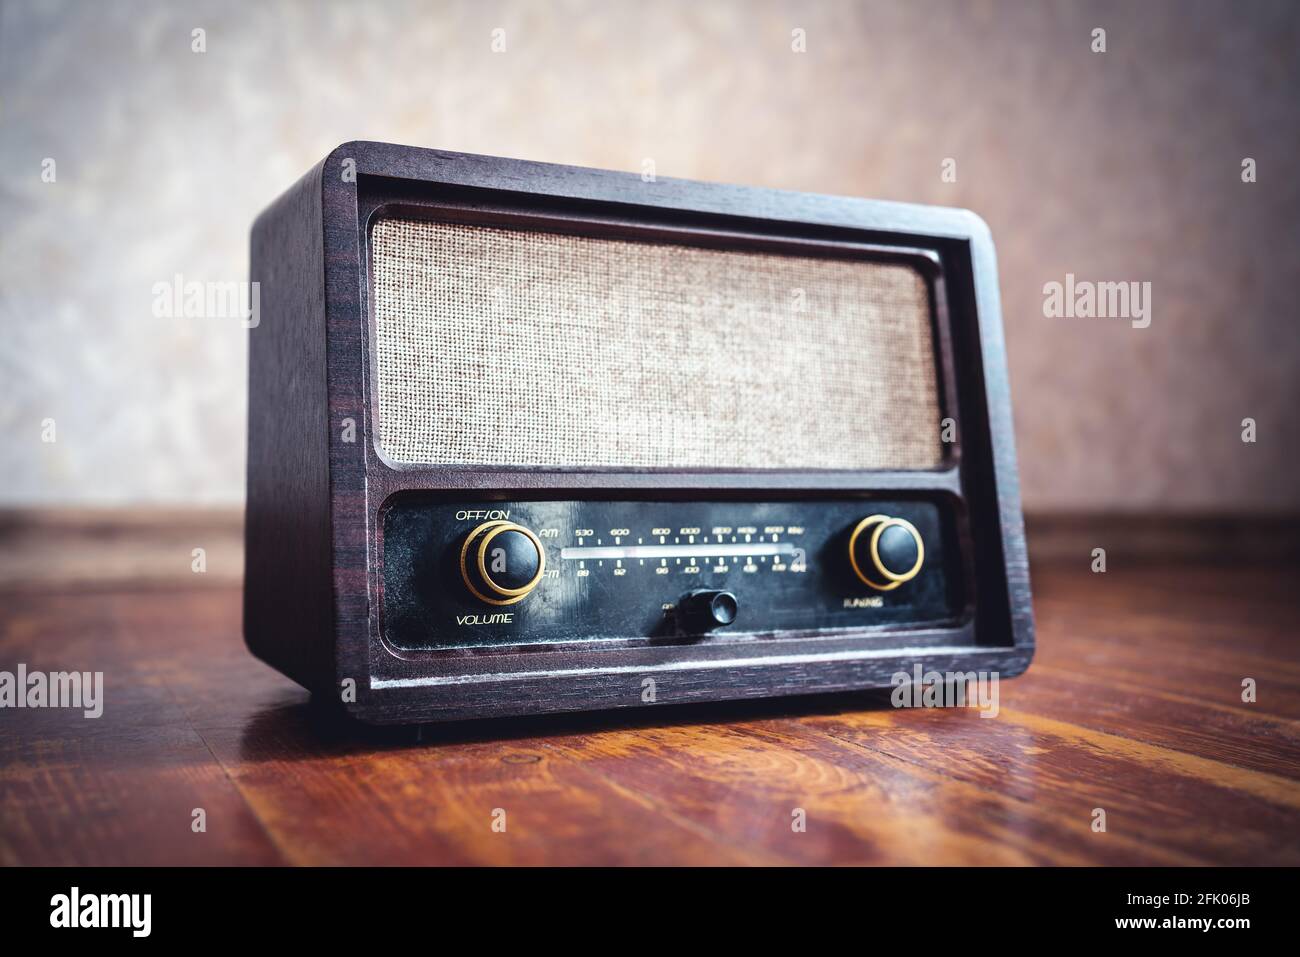 Retro radio. Old vintage music player in 60s style. Dusty receiver, speaker and boombox. Technology nostalgia. Knobs and frequency tuner. Stock Photo